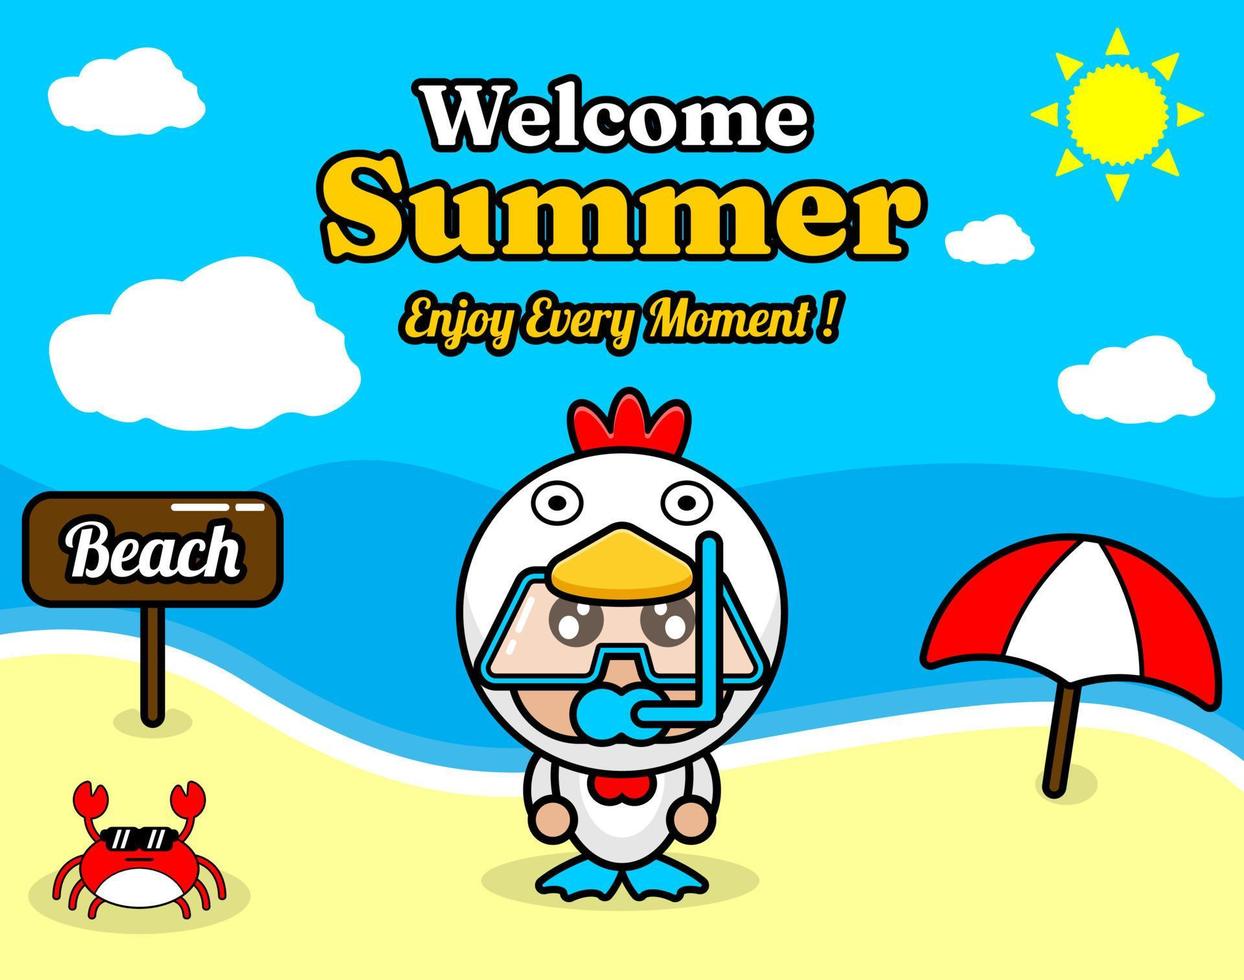 summer beach and sand background design with text enjoy every moment and summer element board that says beach, crab and umbrella, with chicken animal mascot costume wearing senorkel vector